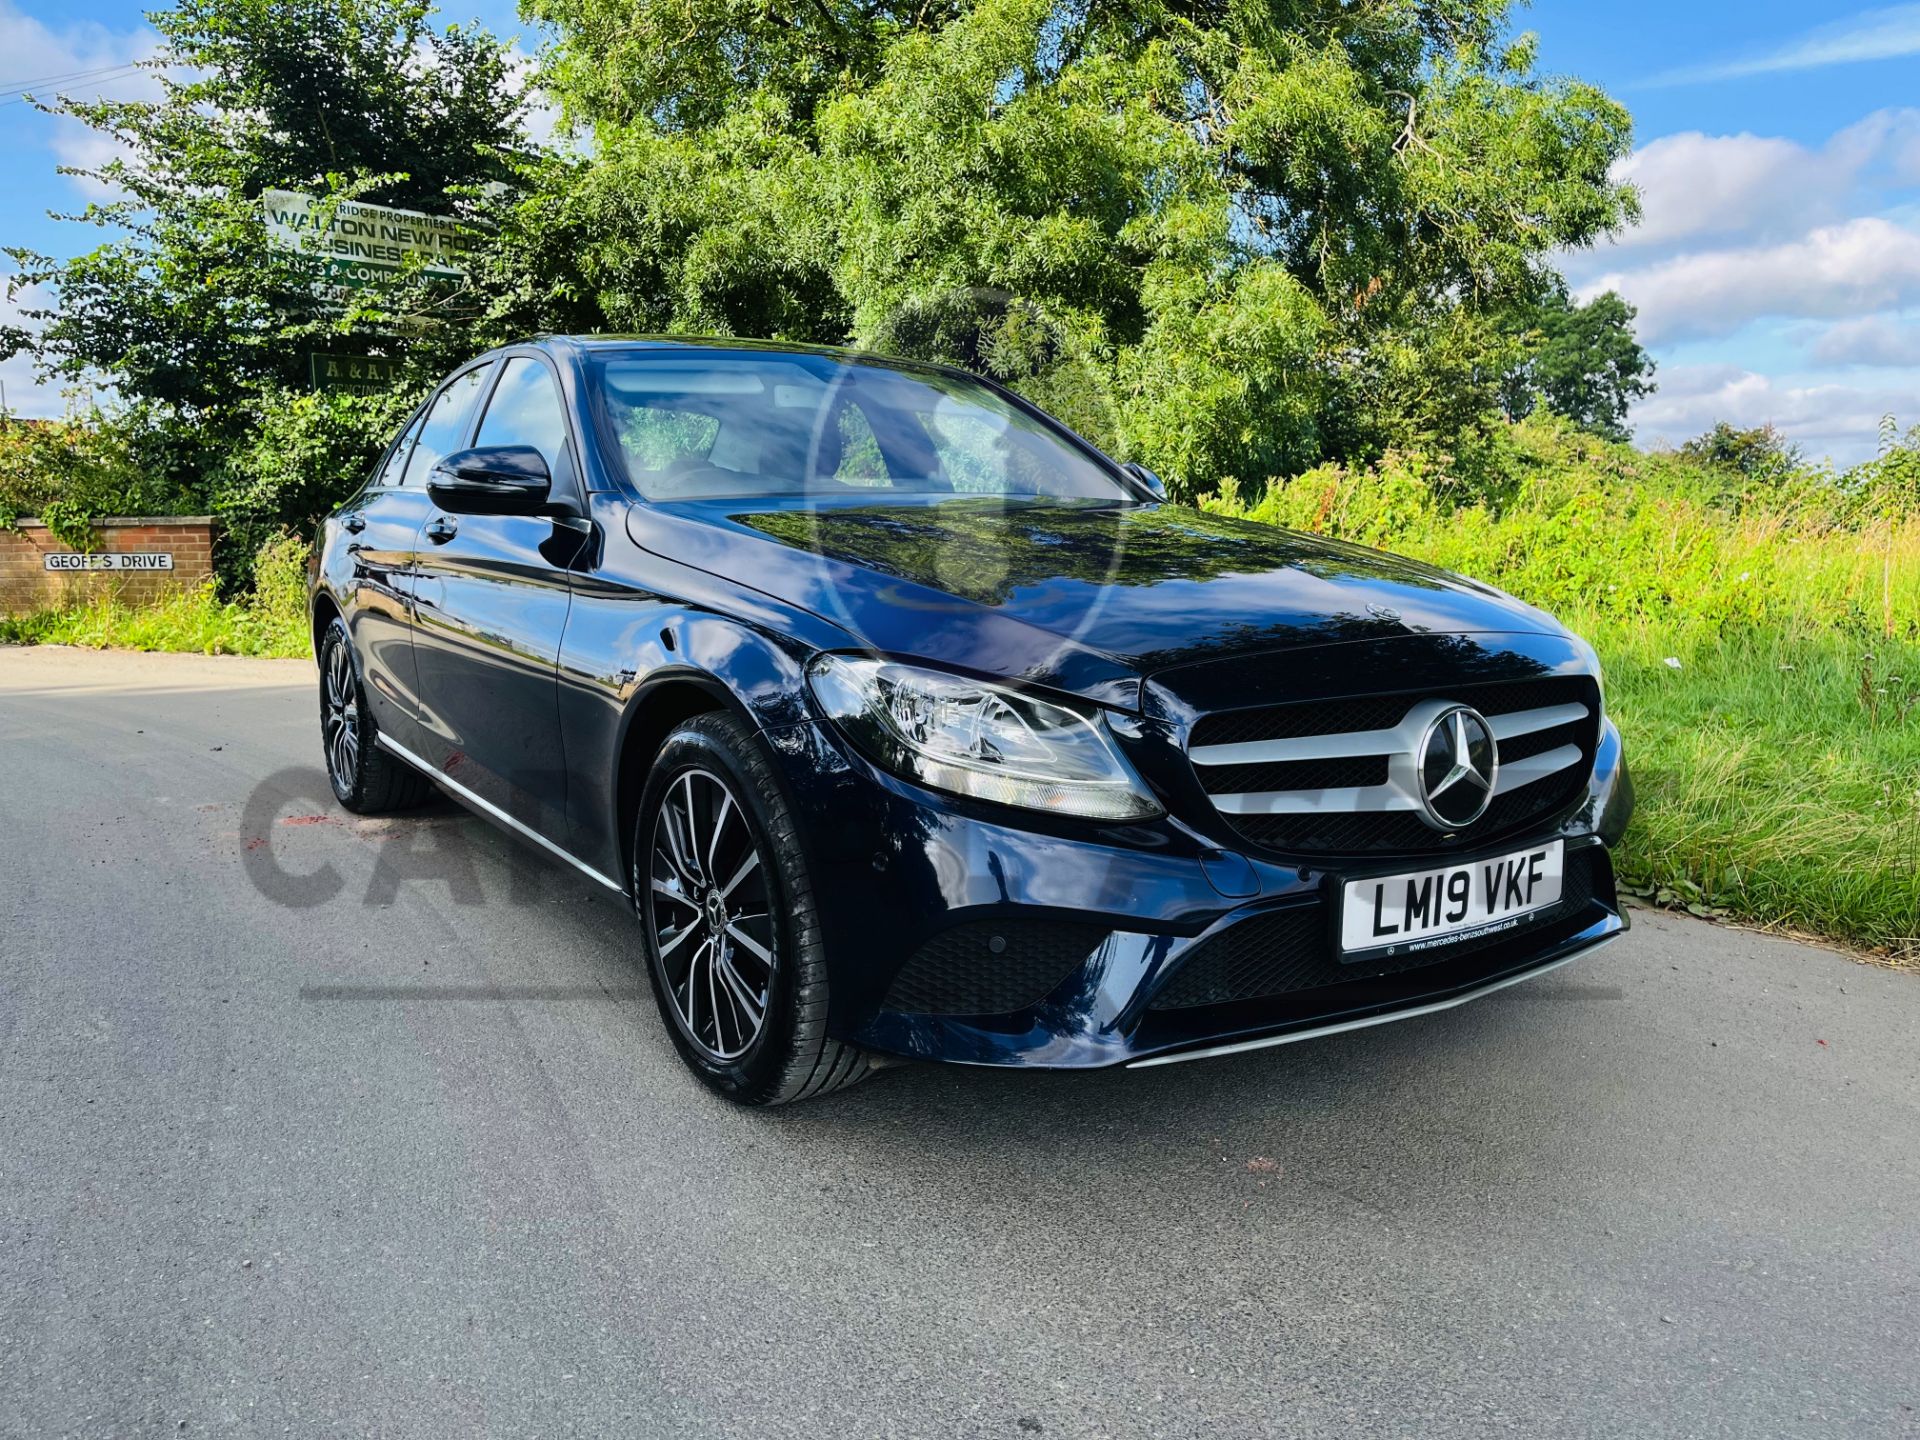 MERCEDES C220d SPECIAL EQUIPMENT (19 REG) 1 OWNER - SAV - REAR CAMERA - LEATHER - - Image 3 of 34